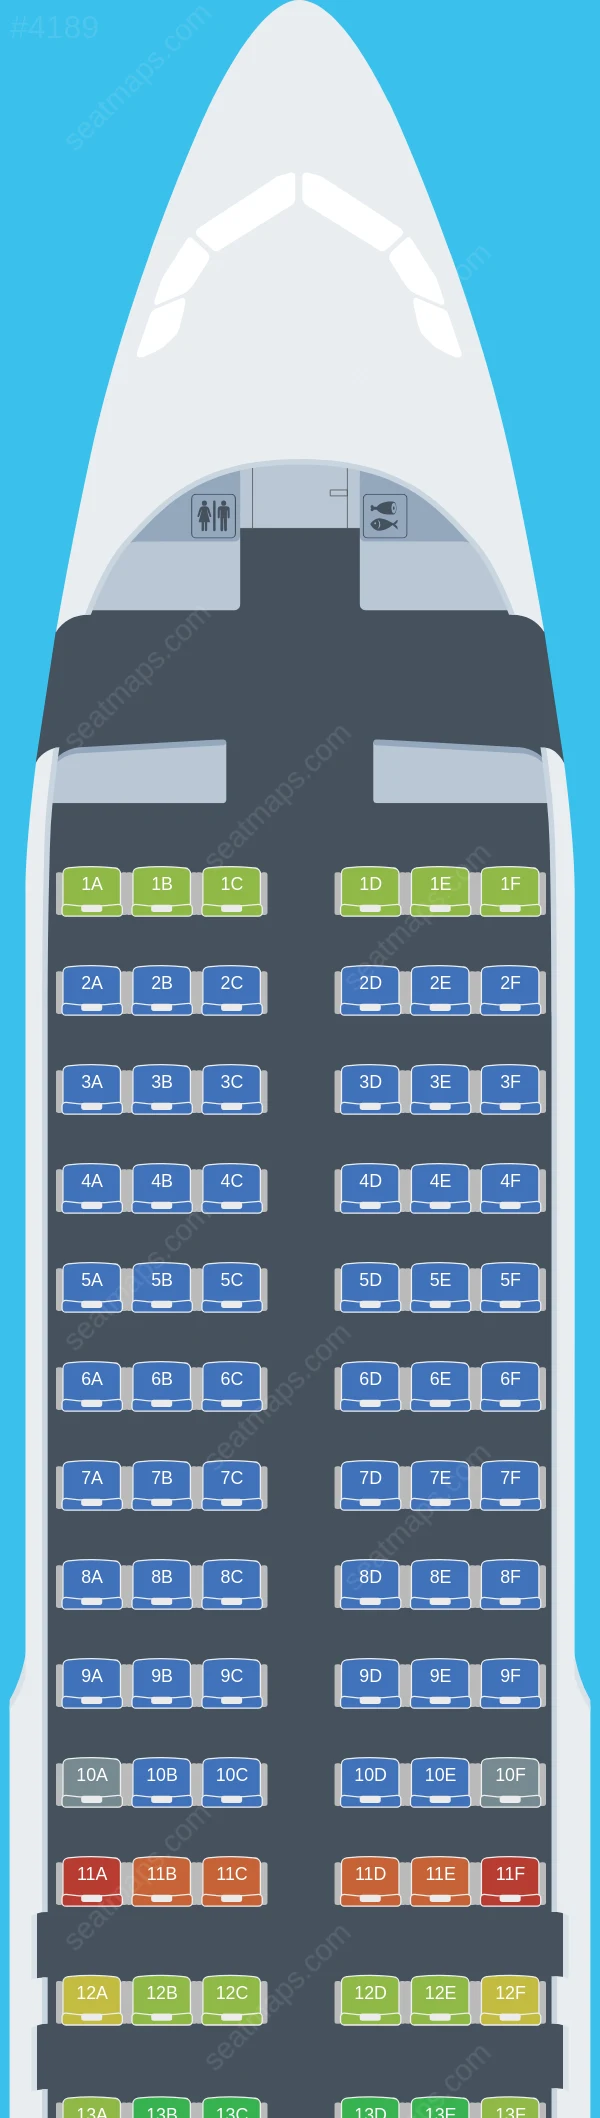 SmartLynx Airbus A320-200 V.1 seatmap preview